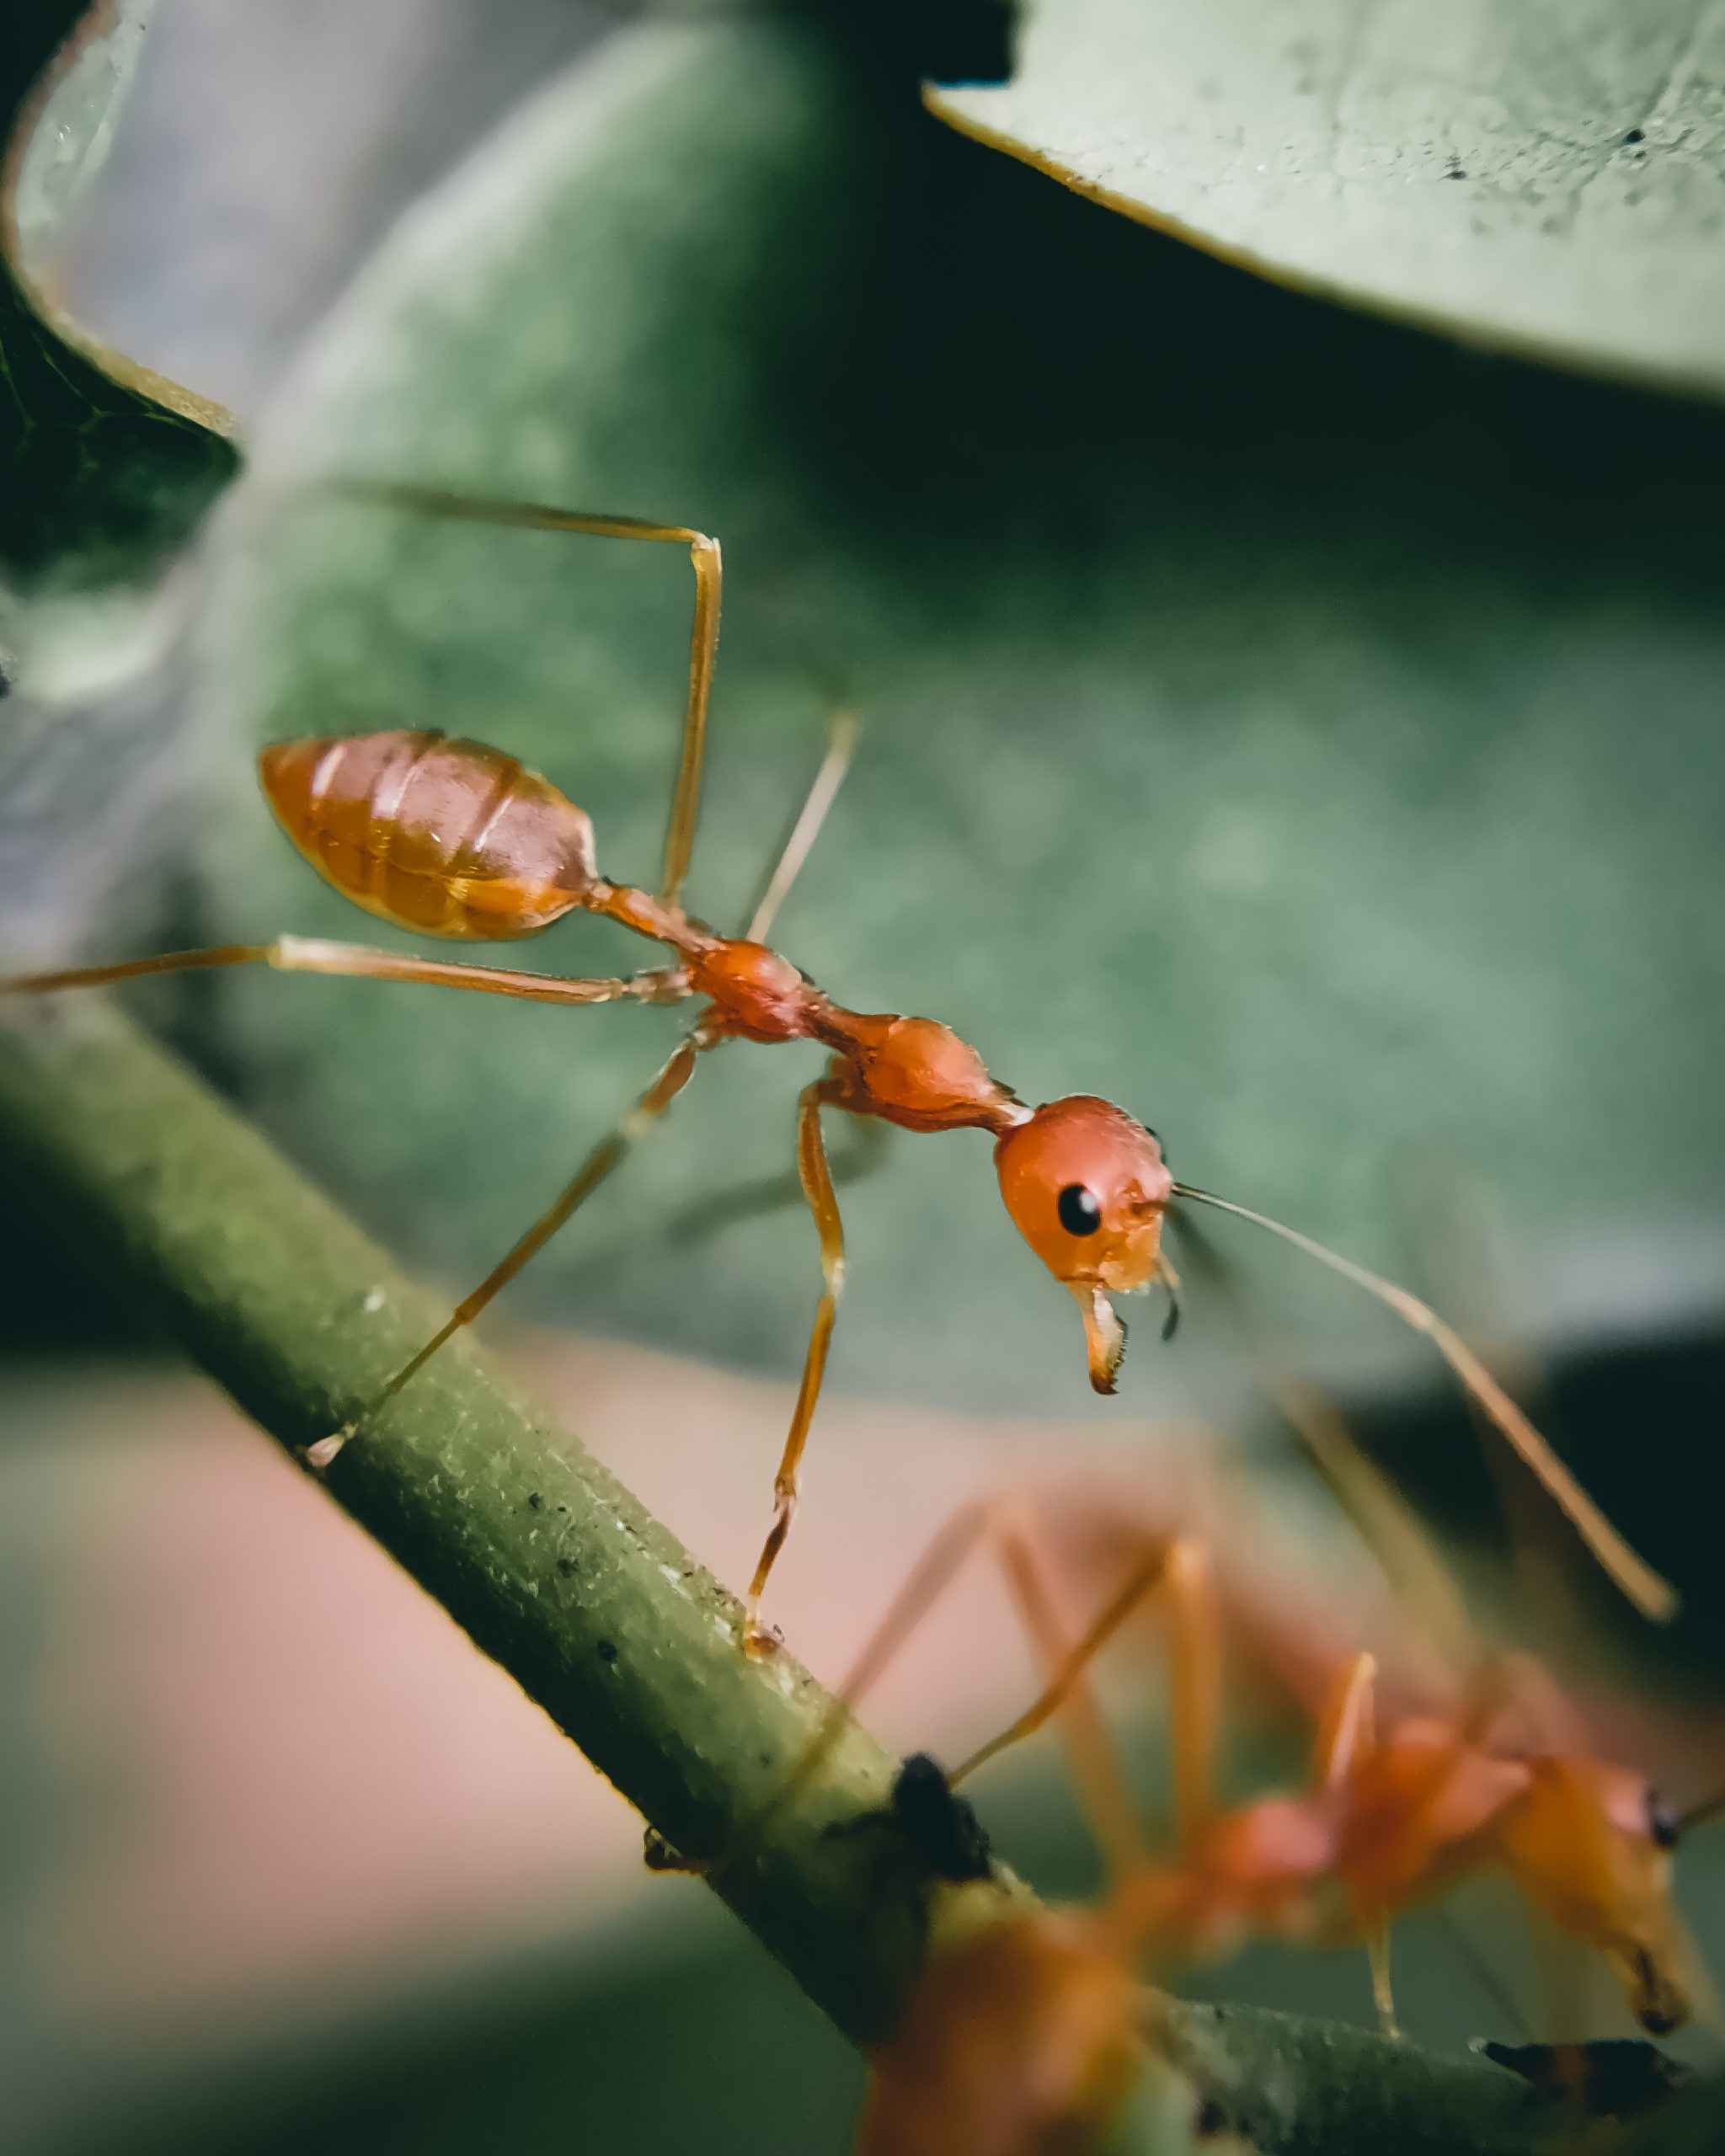 A red ant on plant leaf